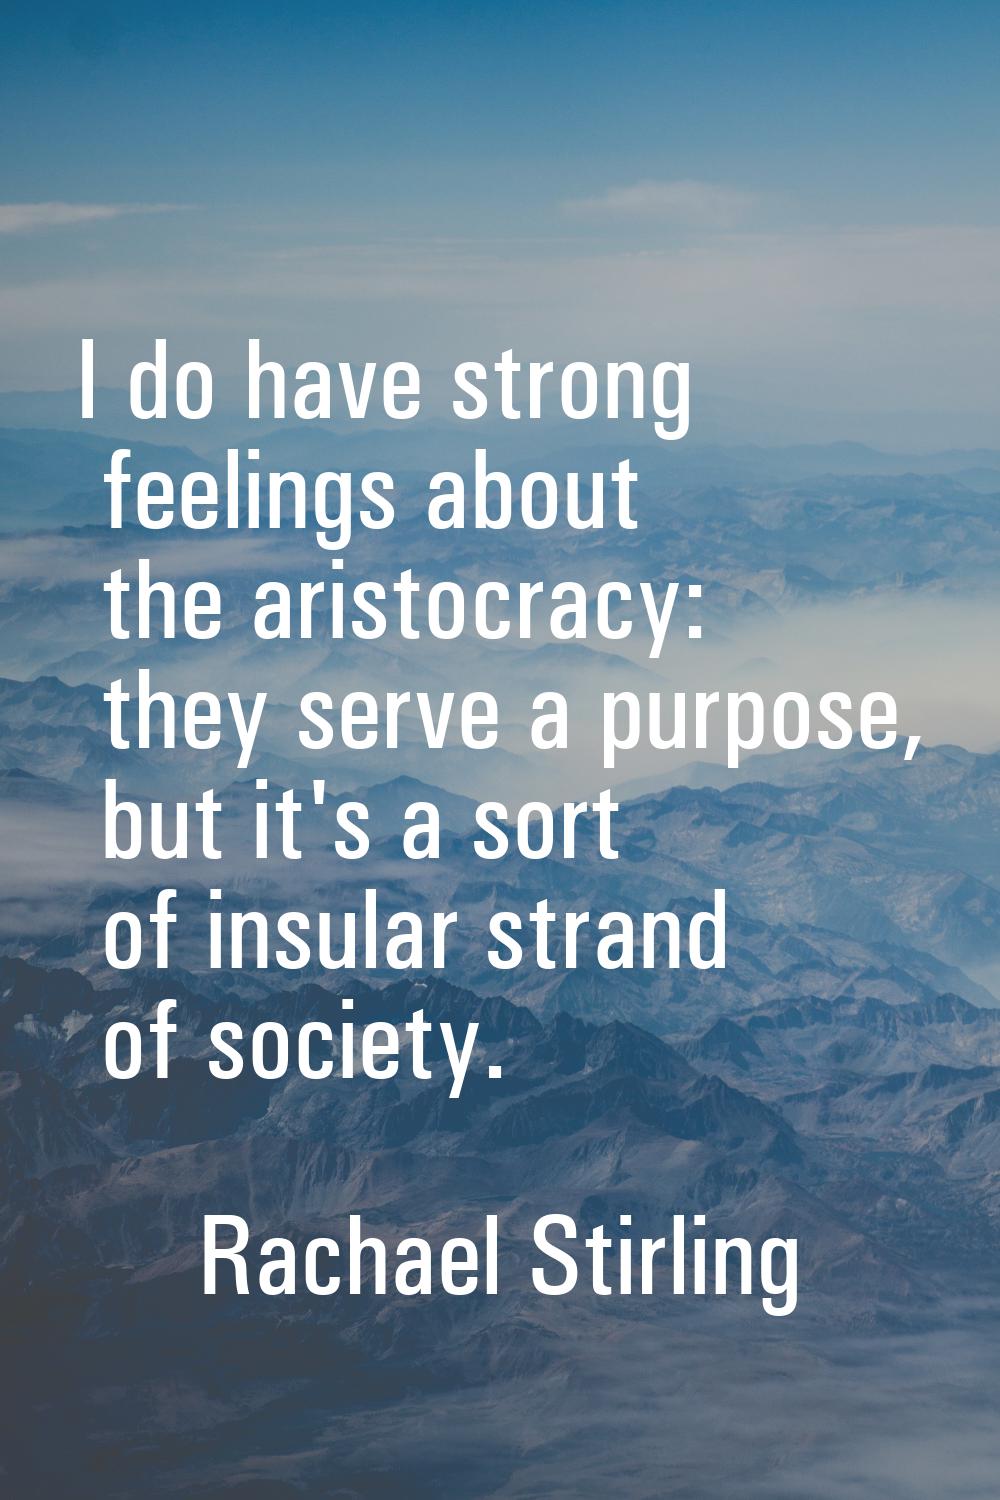 I do have strong feelings about the aristocracy: they serve a purpose, but it's a sort of insular s